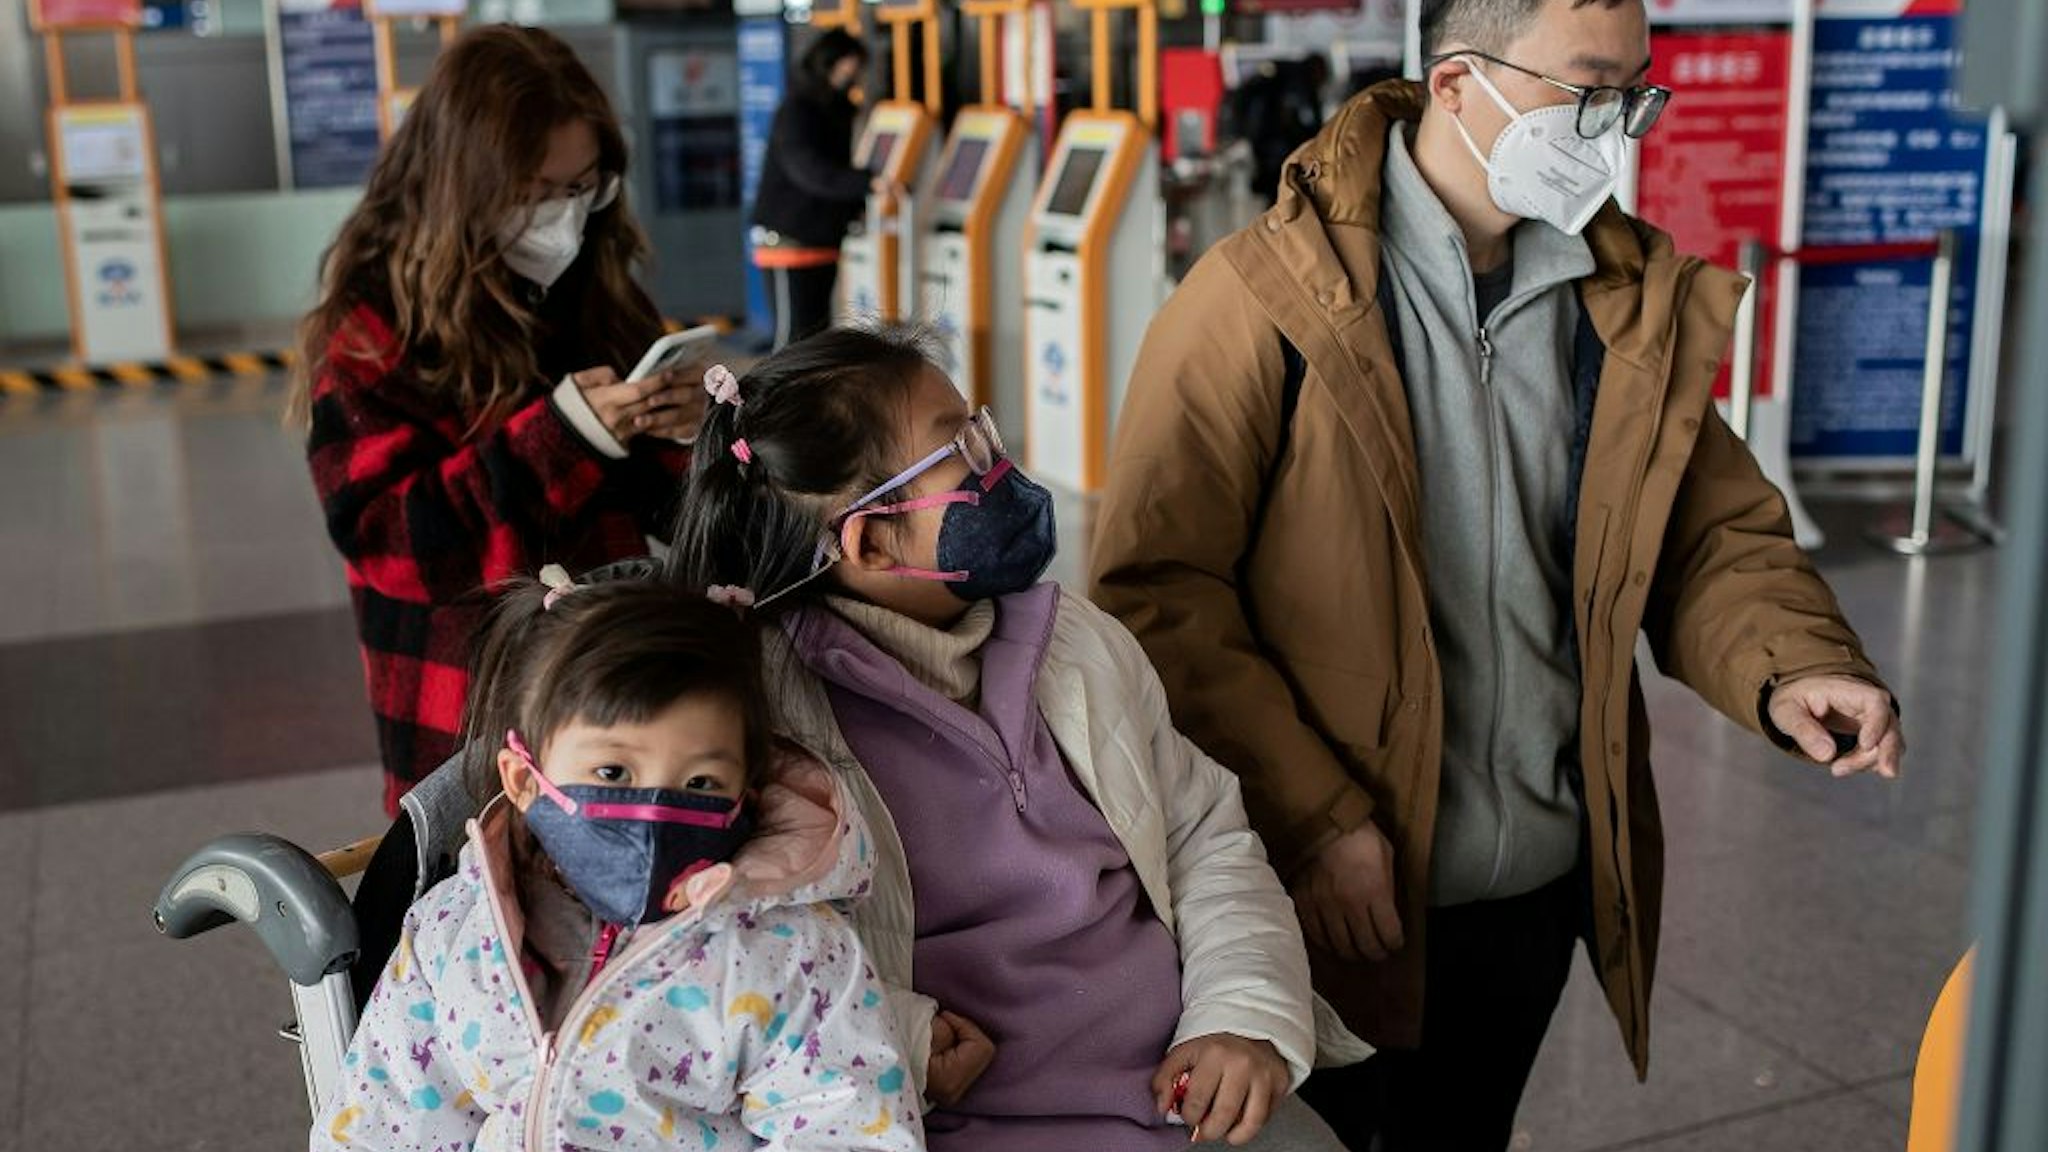 People travelling for the Lunar New Year wear protective masks as they head to the departure area at the Beijing Capital International Airport in Beijing on January 22, 2020.